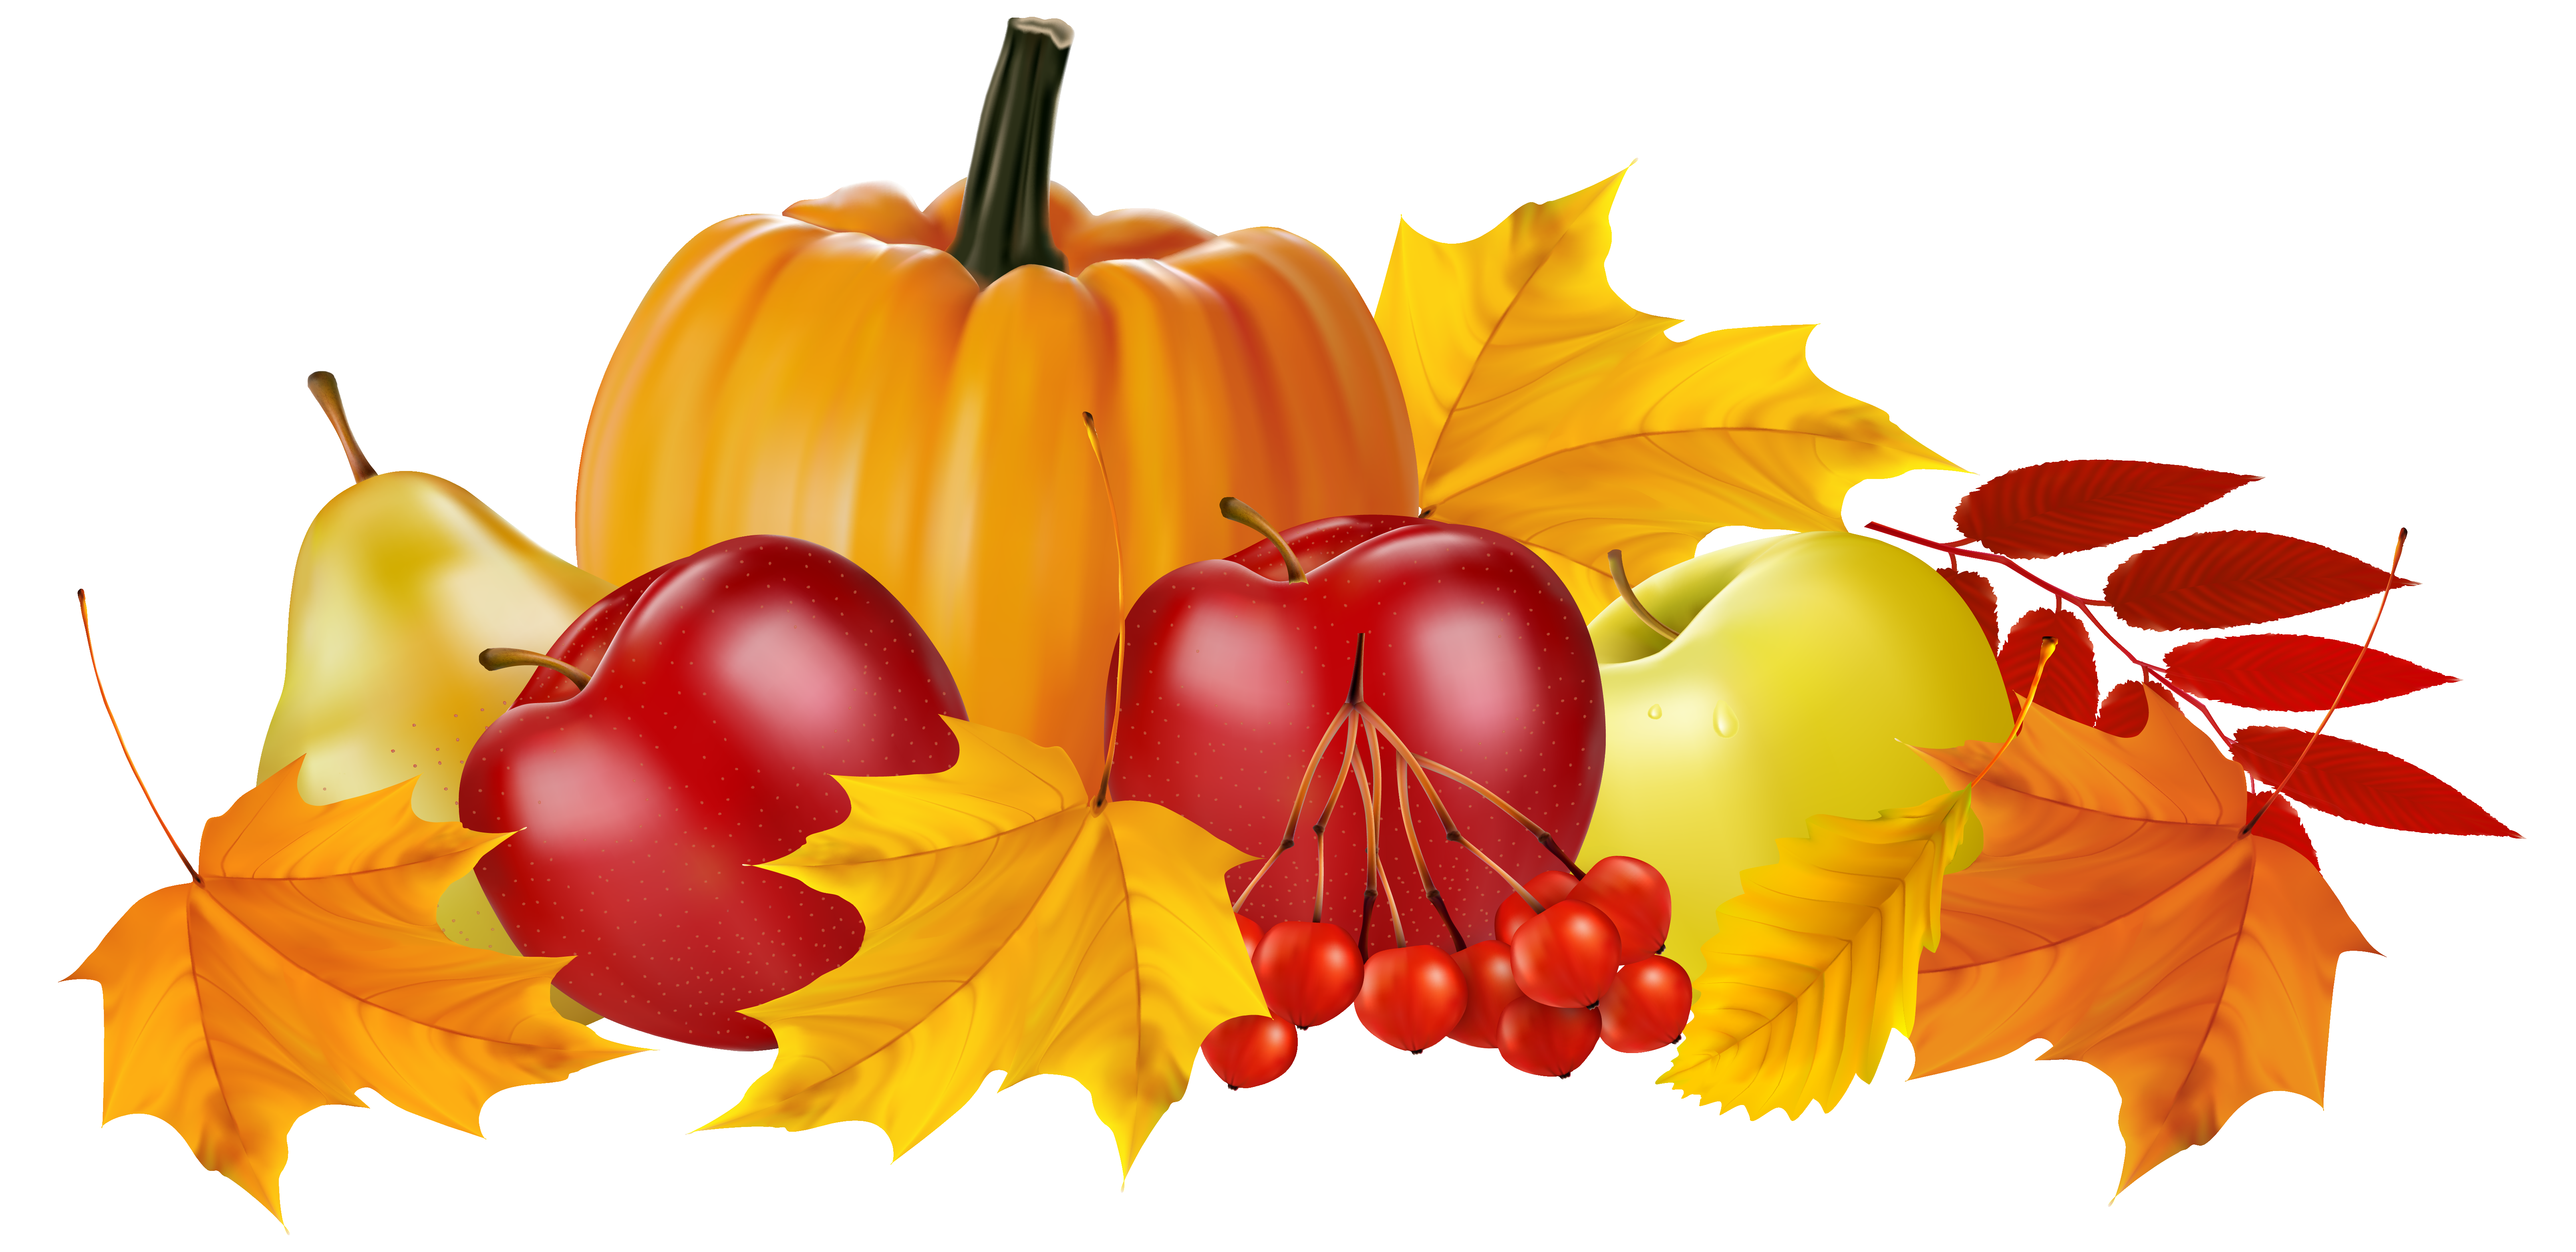 Autumn Pumpkin and Fruits PNG Clipart Image.